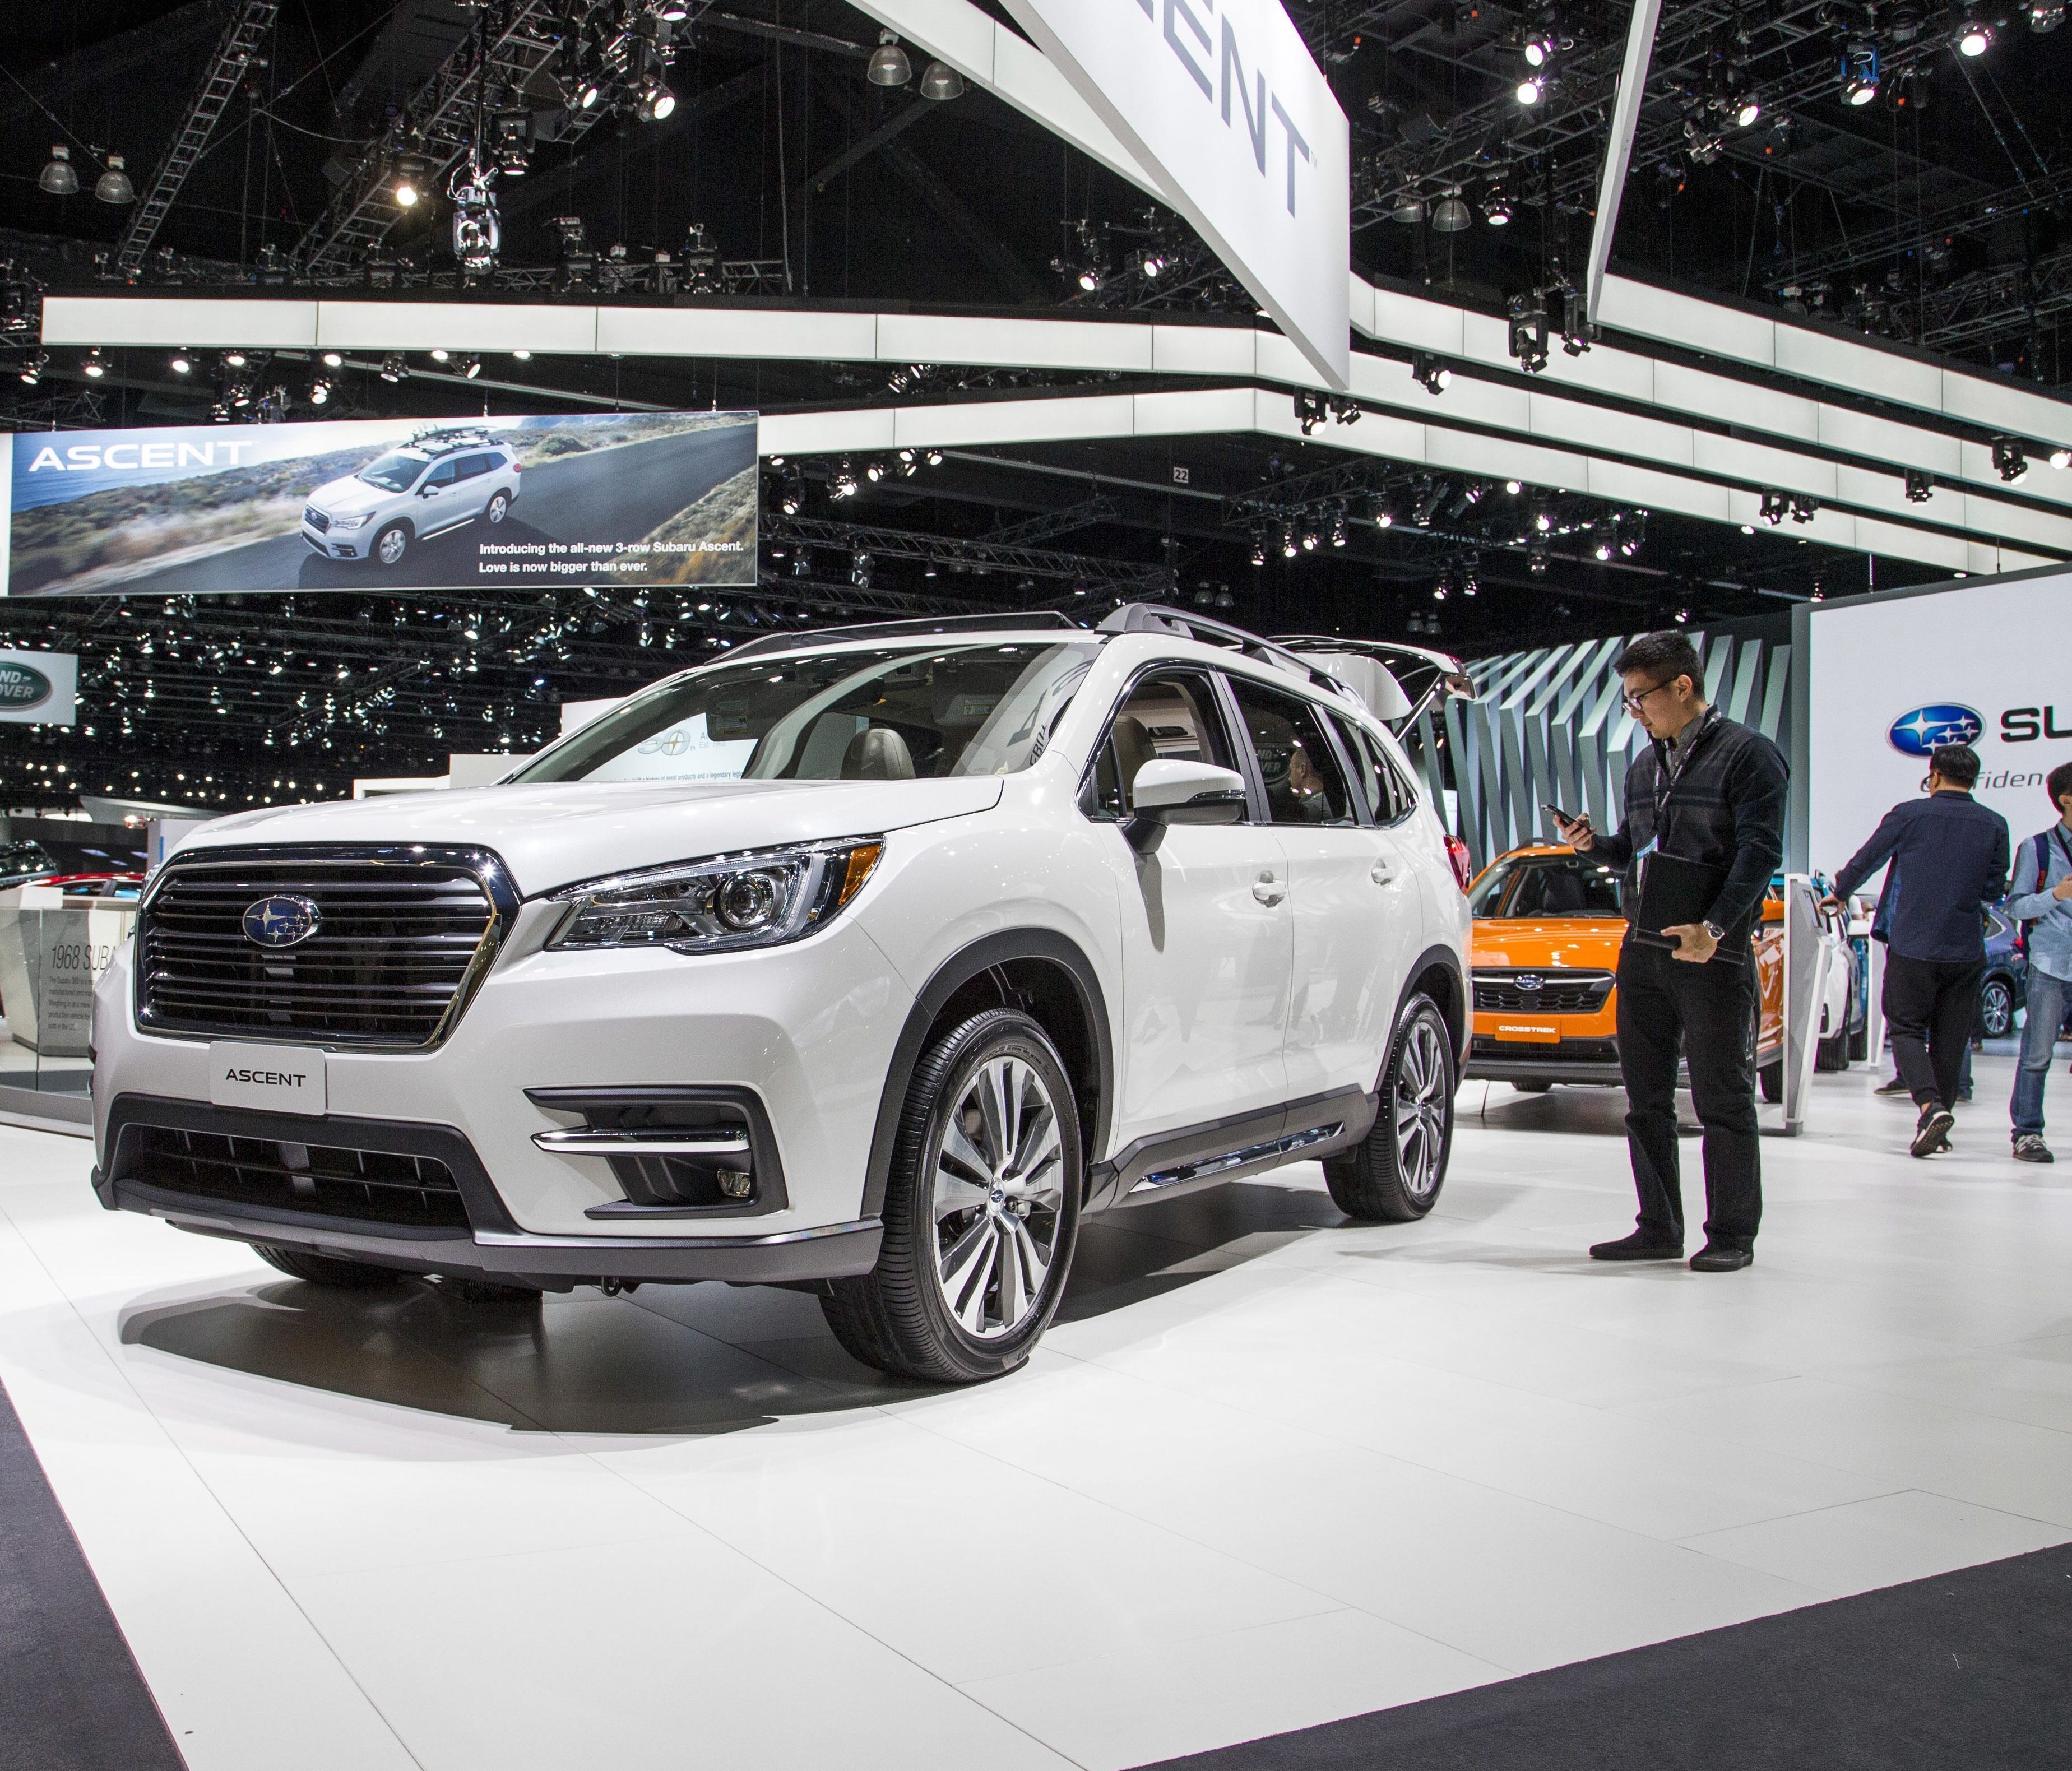 This photo provided by Edmunds shows Subaru's booth at the 2017 Los Angeles Auto Show. Shoppers can use such shows as a one-stop fact-finding mission for their next car purchase. They can ask questions of the experts at the displays, get hands-on exp